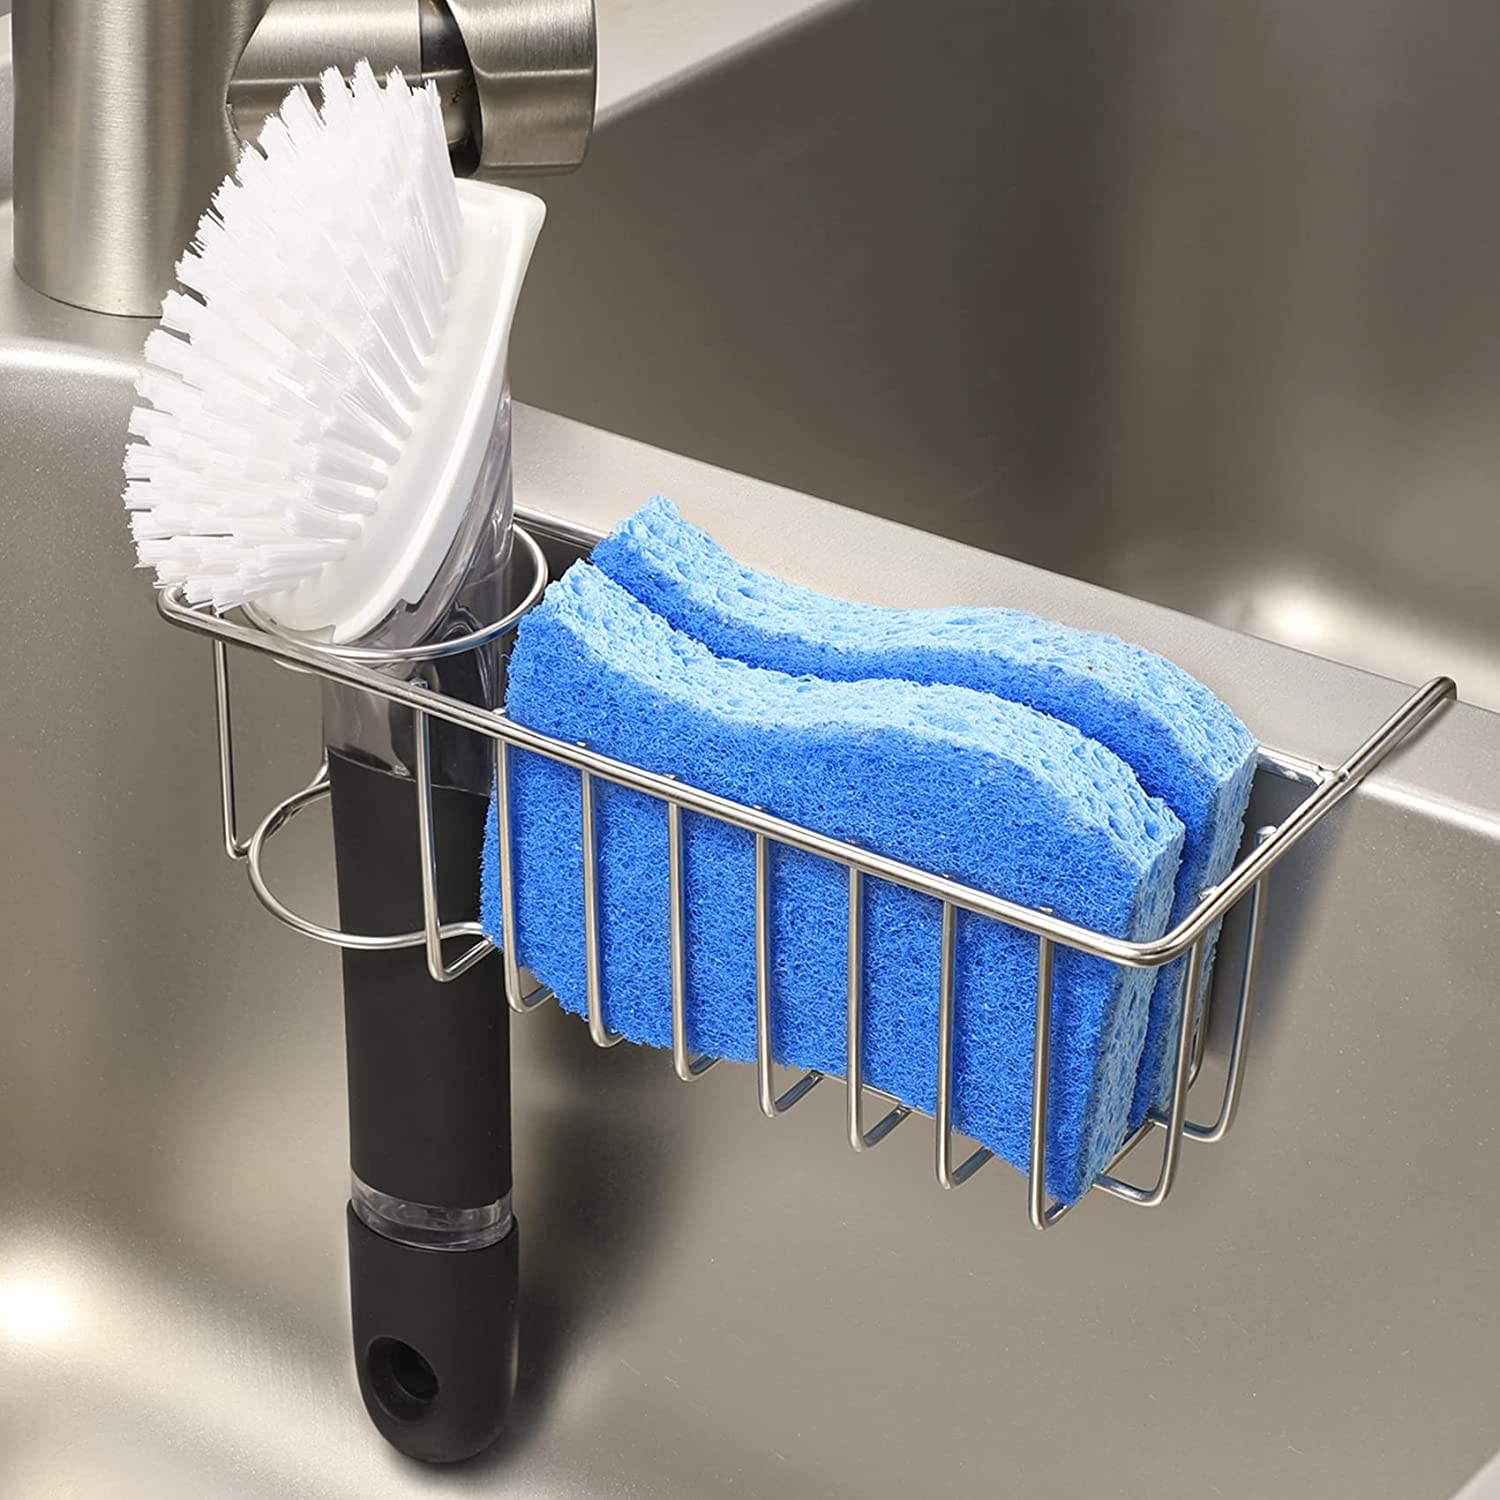 Sink Caddy, Consumest Kitchen Sponge Holder + Dish Brush Holder for Kitchen  Sink, Sink Organizer with Drip Tray for Countertop, Stainless Steel  Rustproof - Silver 